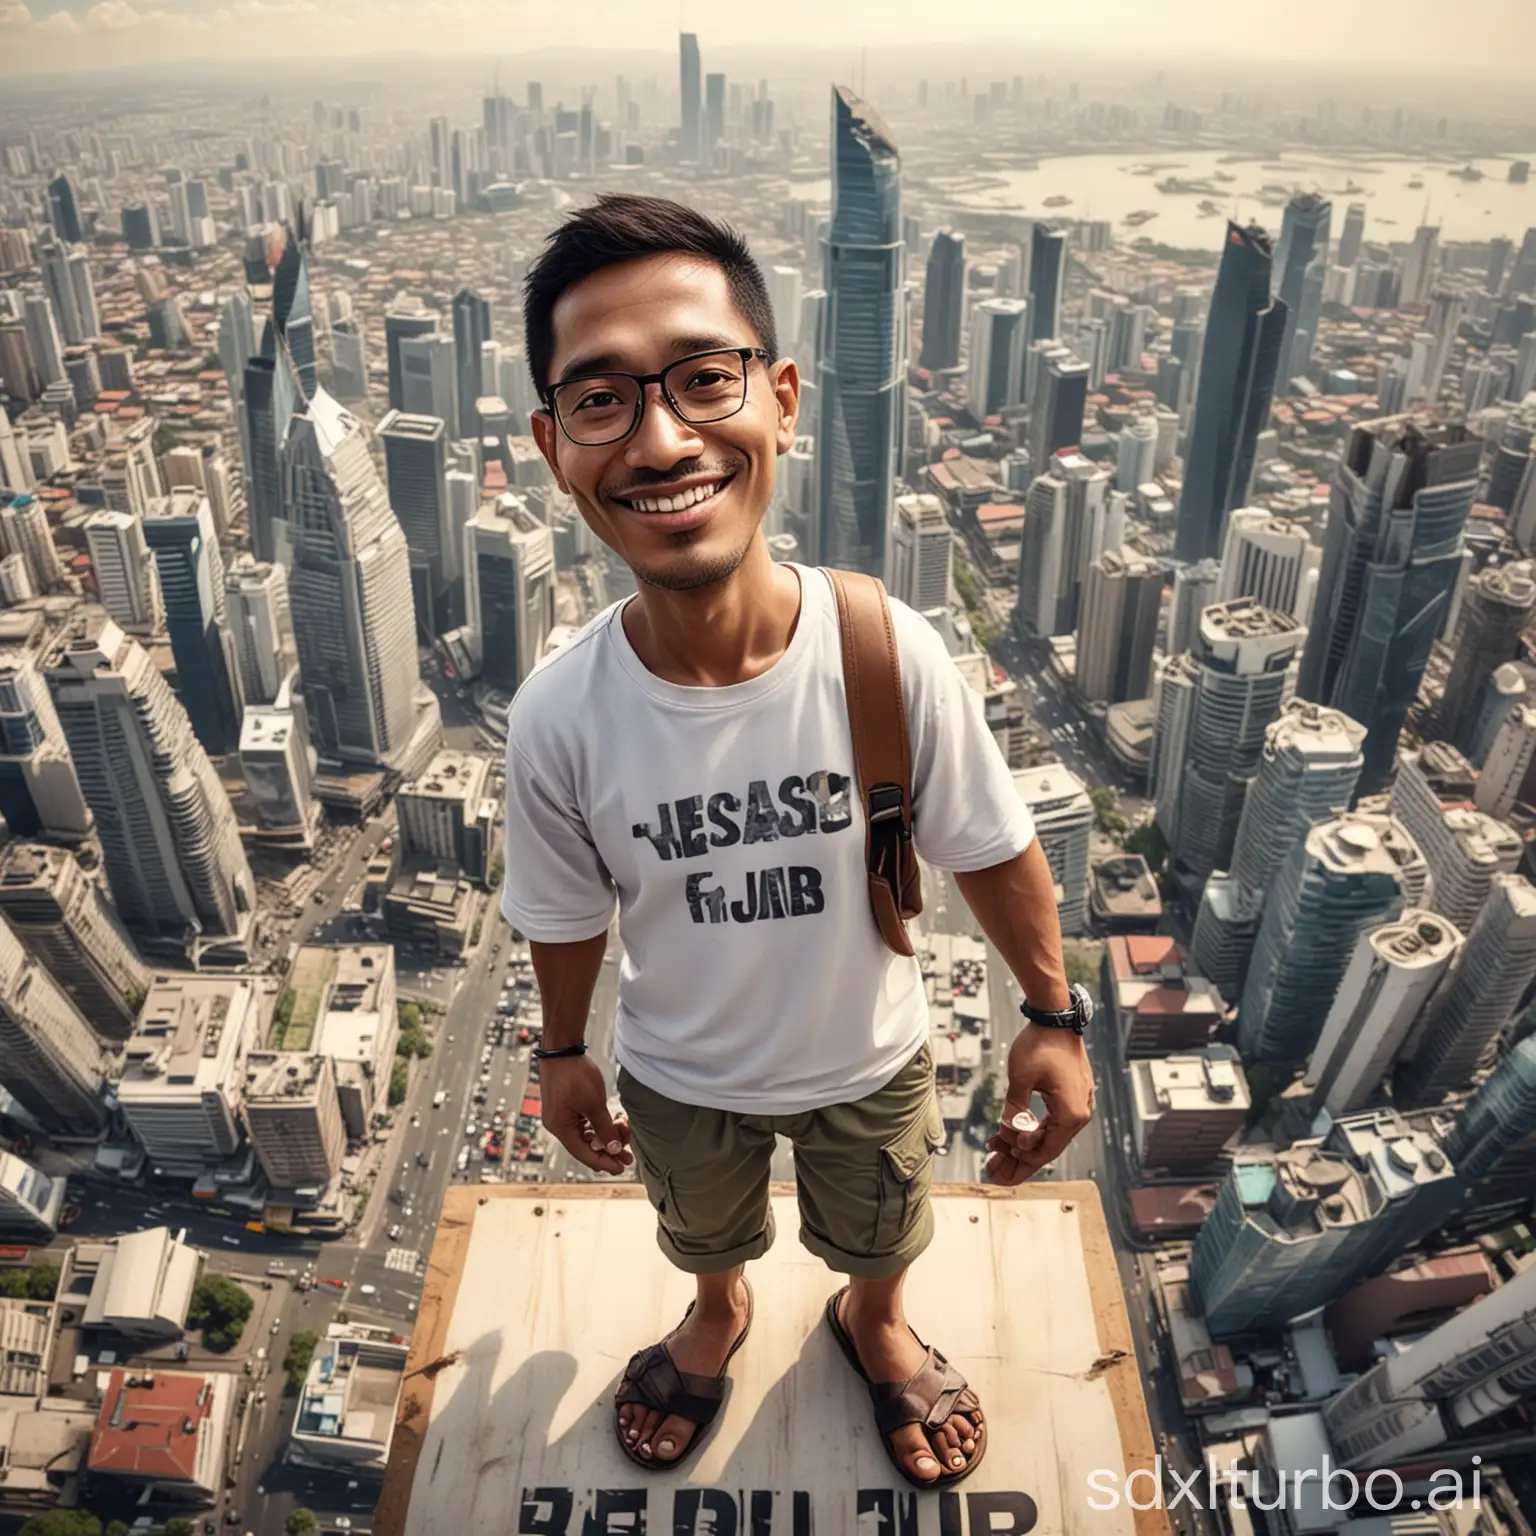 Indonesian-Man-at-Top-of-Tallest-Building-Holding-Camera-Mans-Hand